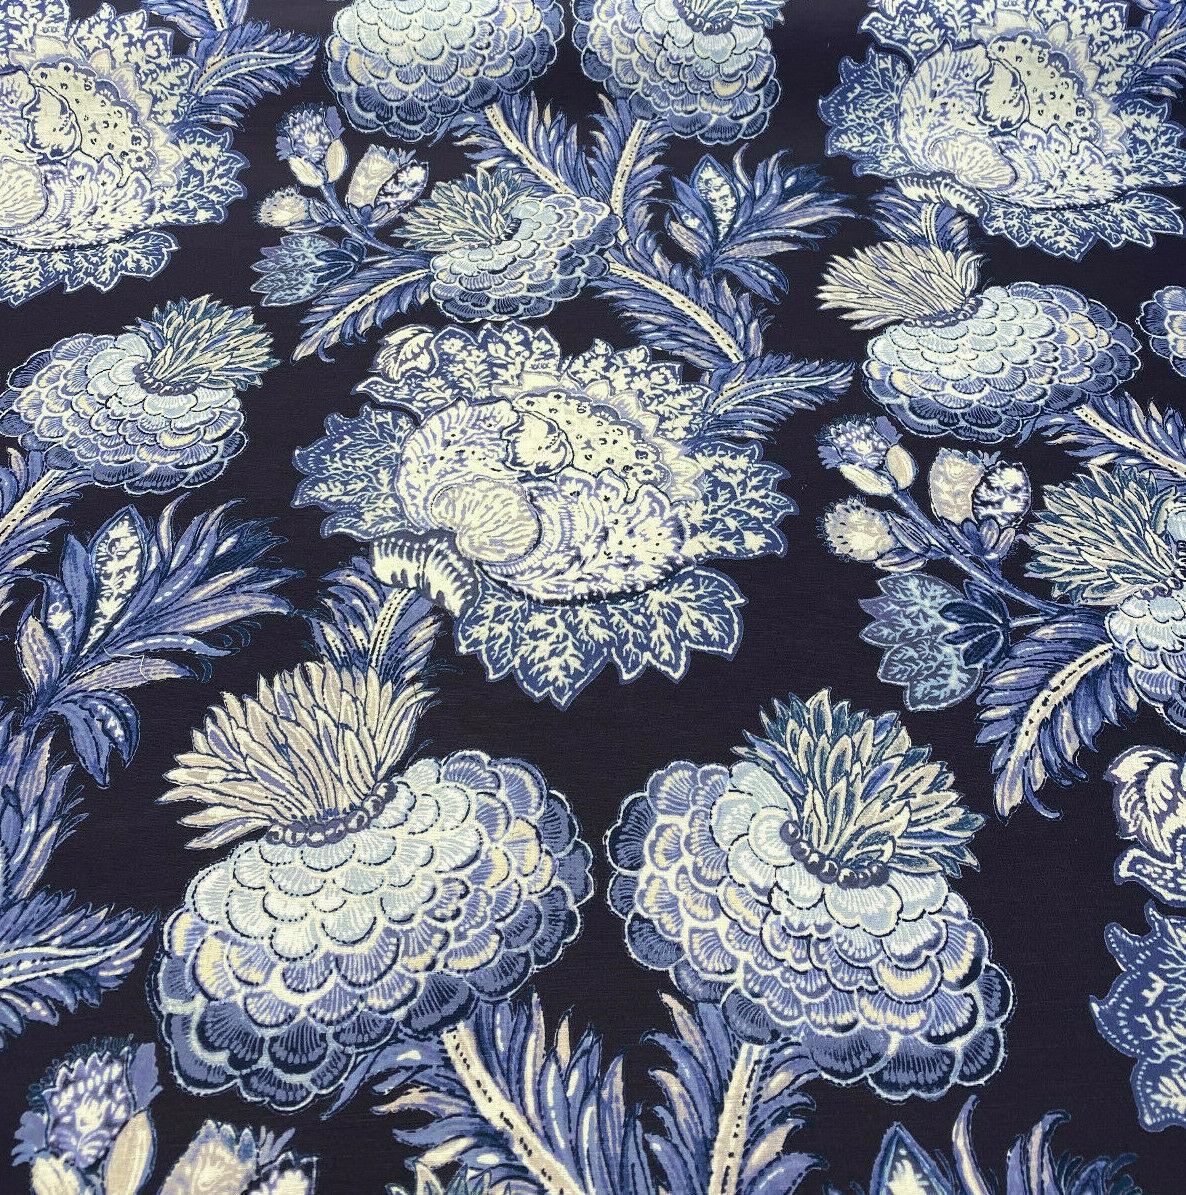 Garden Toile - Floral Fabric By The Yard